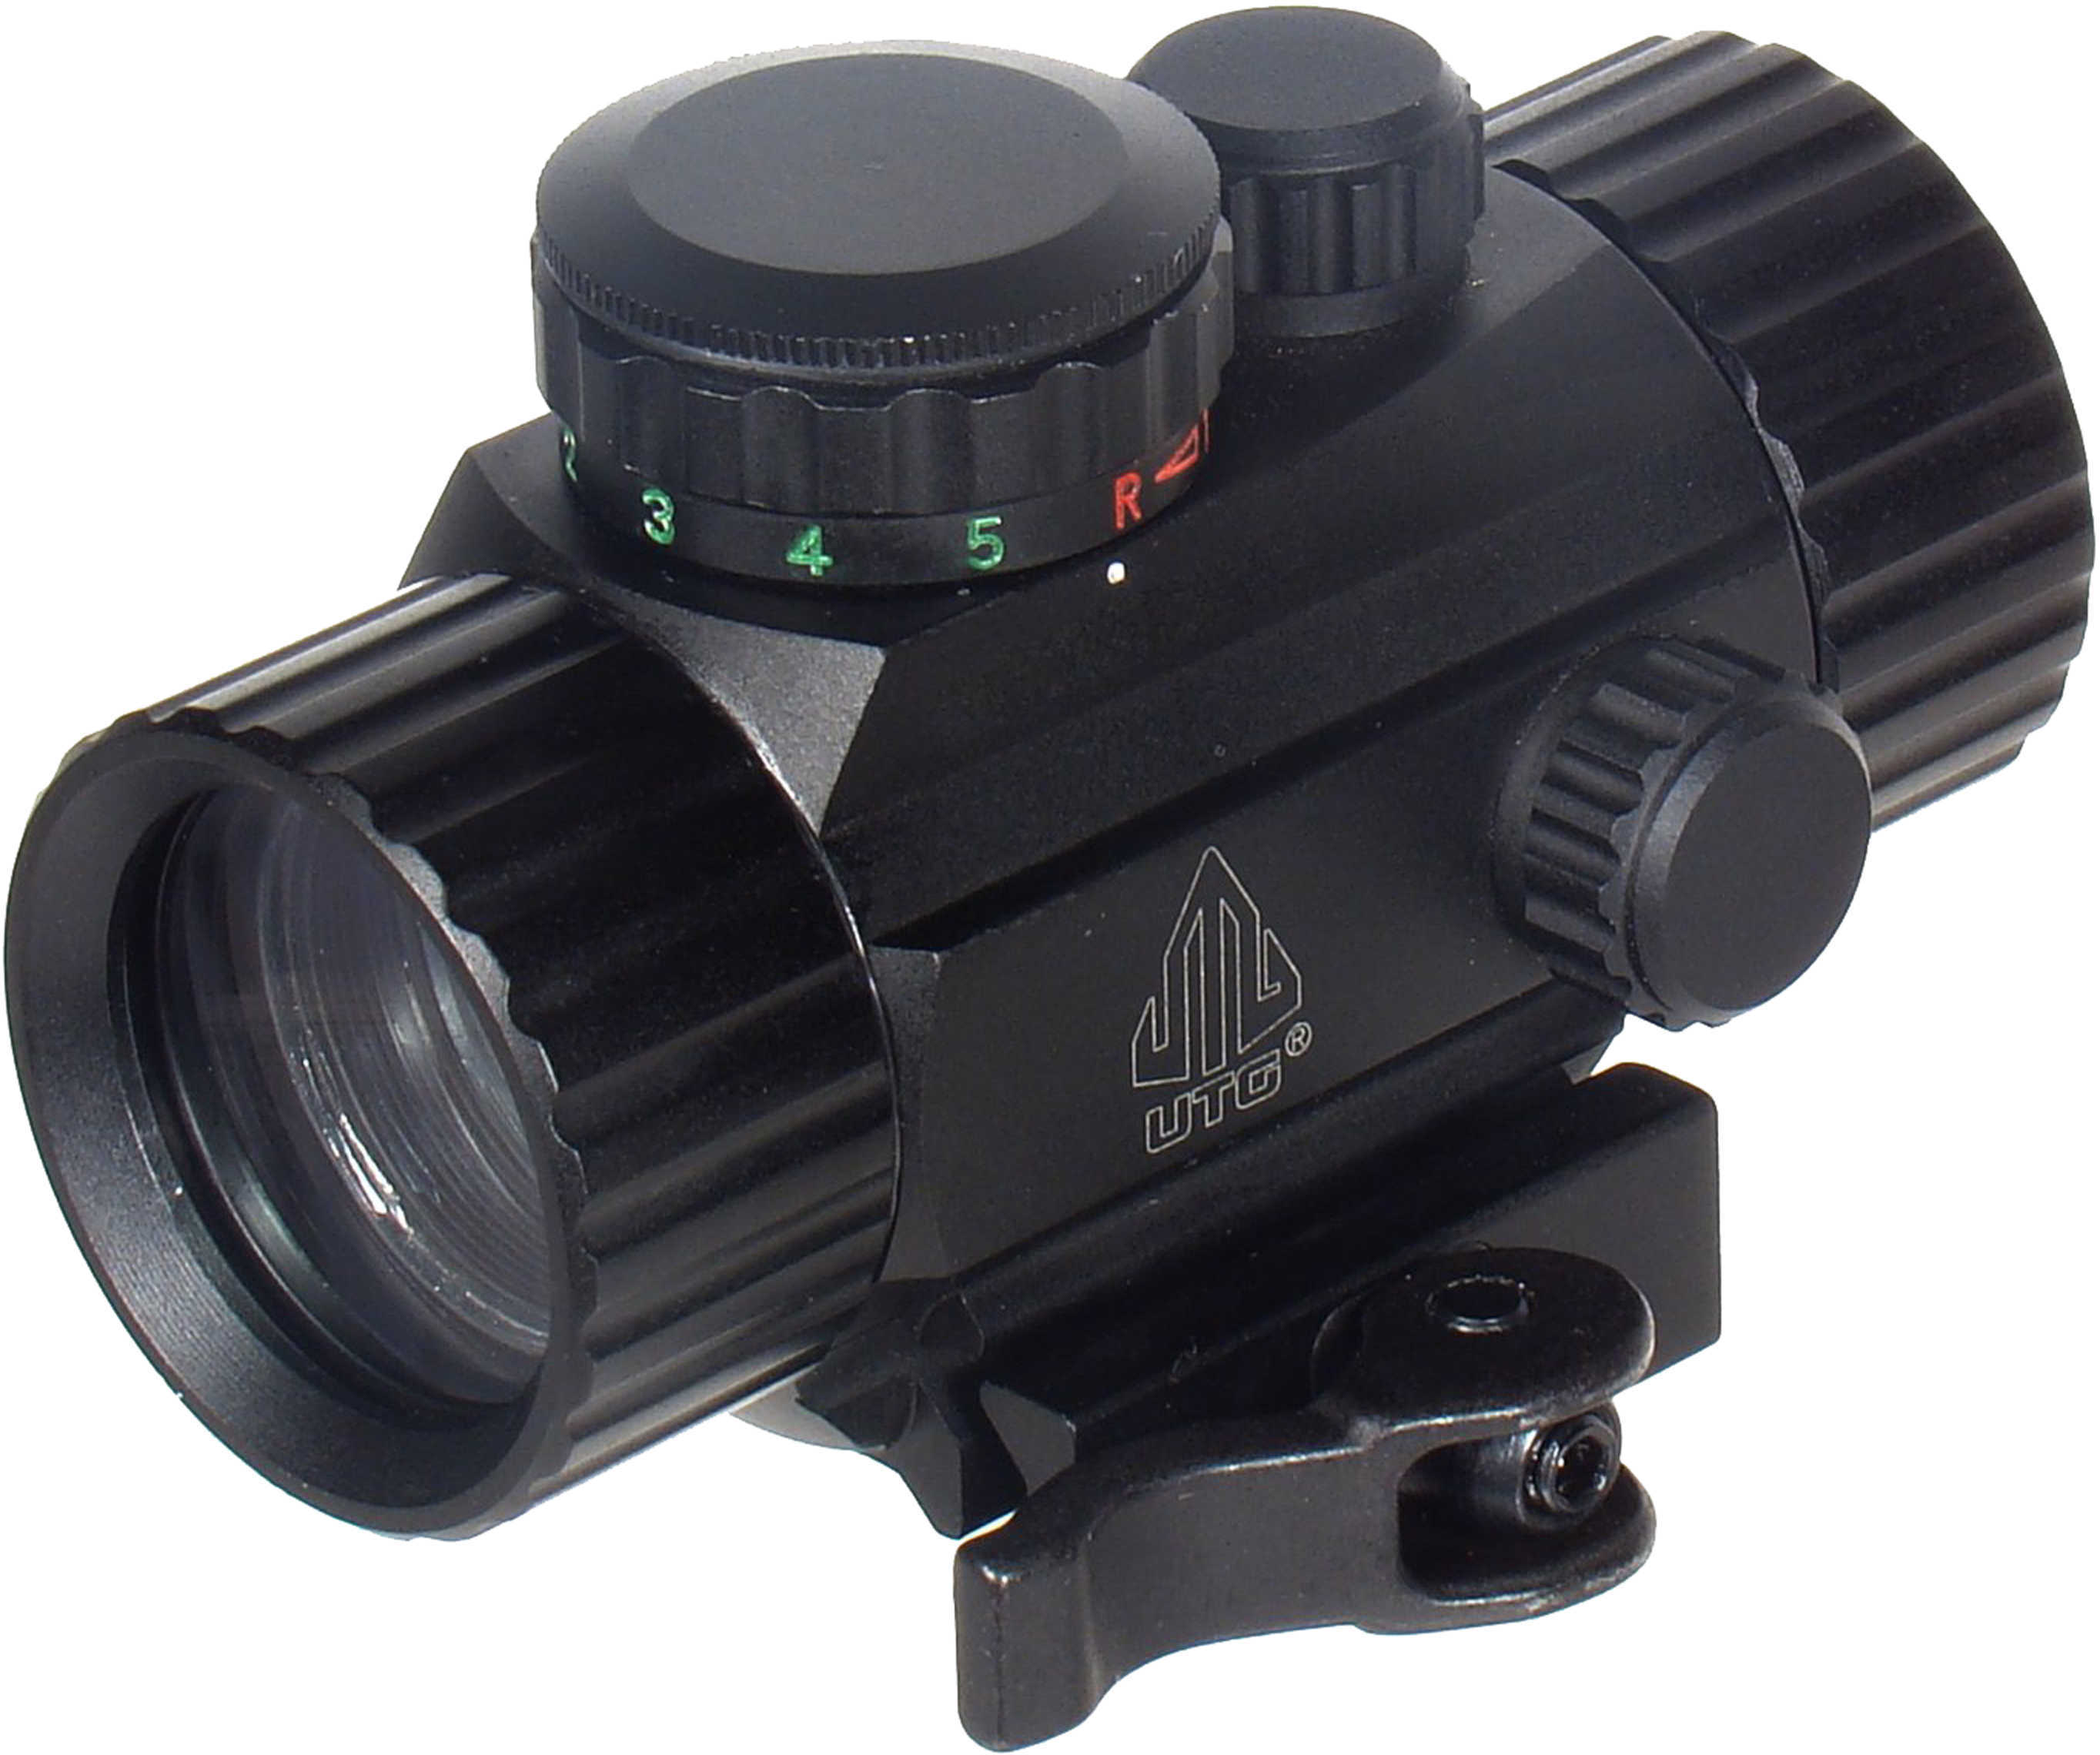 UTG SCPRG40CDQ Circle Dot Sight 1x 30mm 4 MOA Illuminated Red/Green CR2032 Lithium Black Hardcoat Anodized